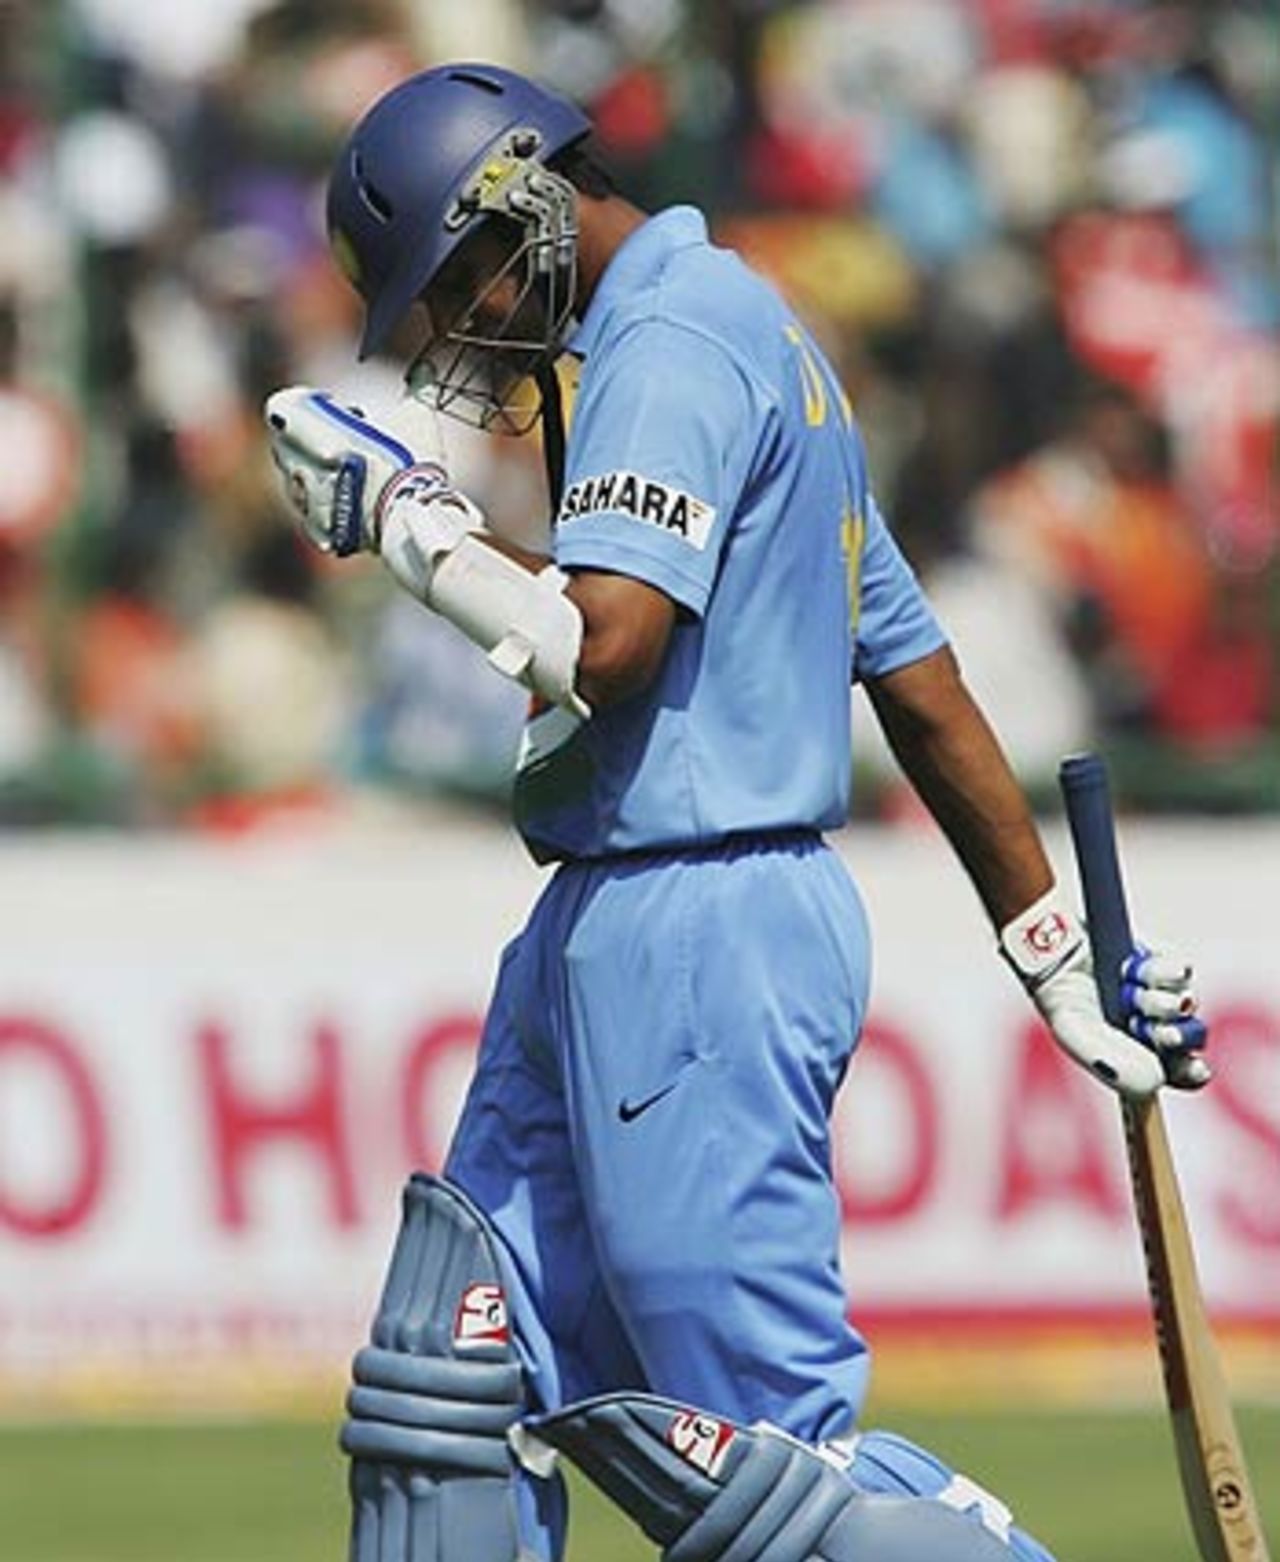 A disappointed Rahul Dravid walks back to the dressing room, India v England, 1st ODI, New Delhi, March 28 2006